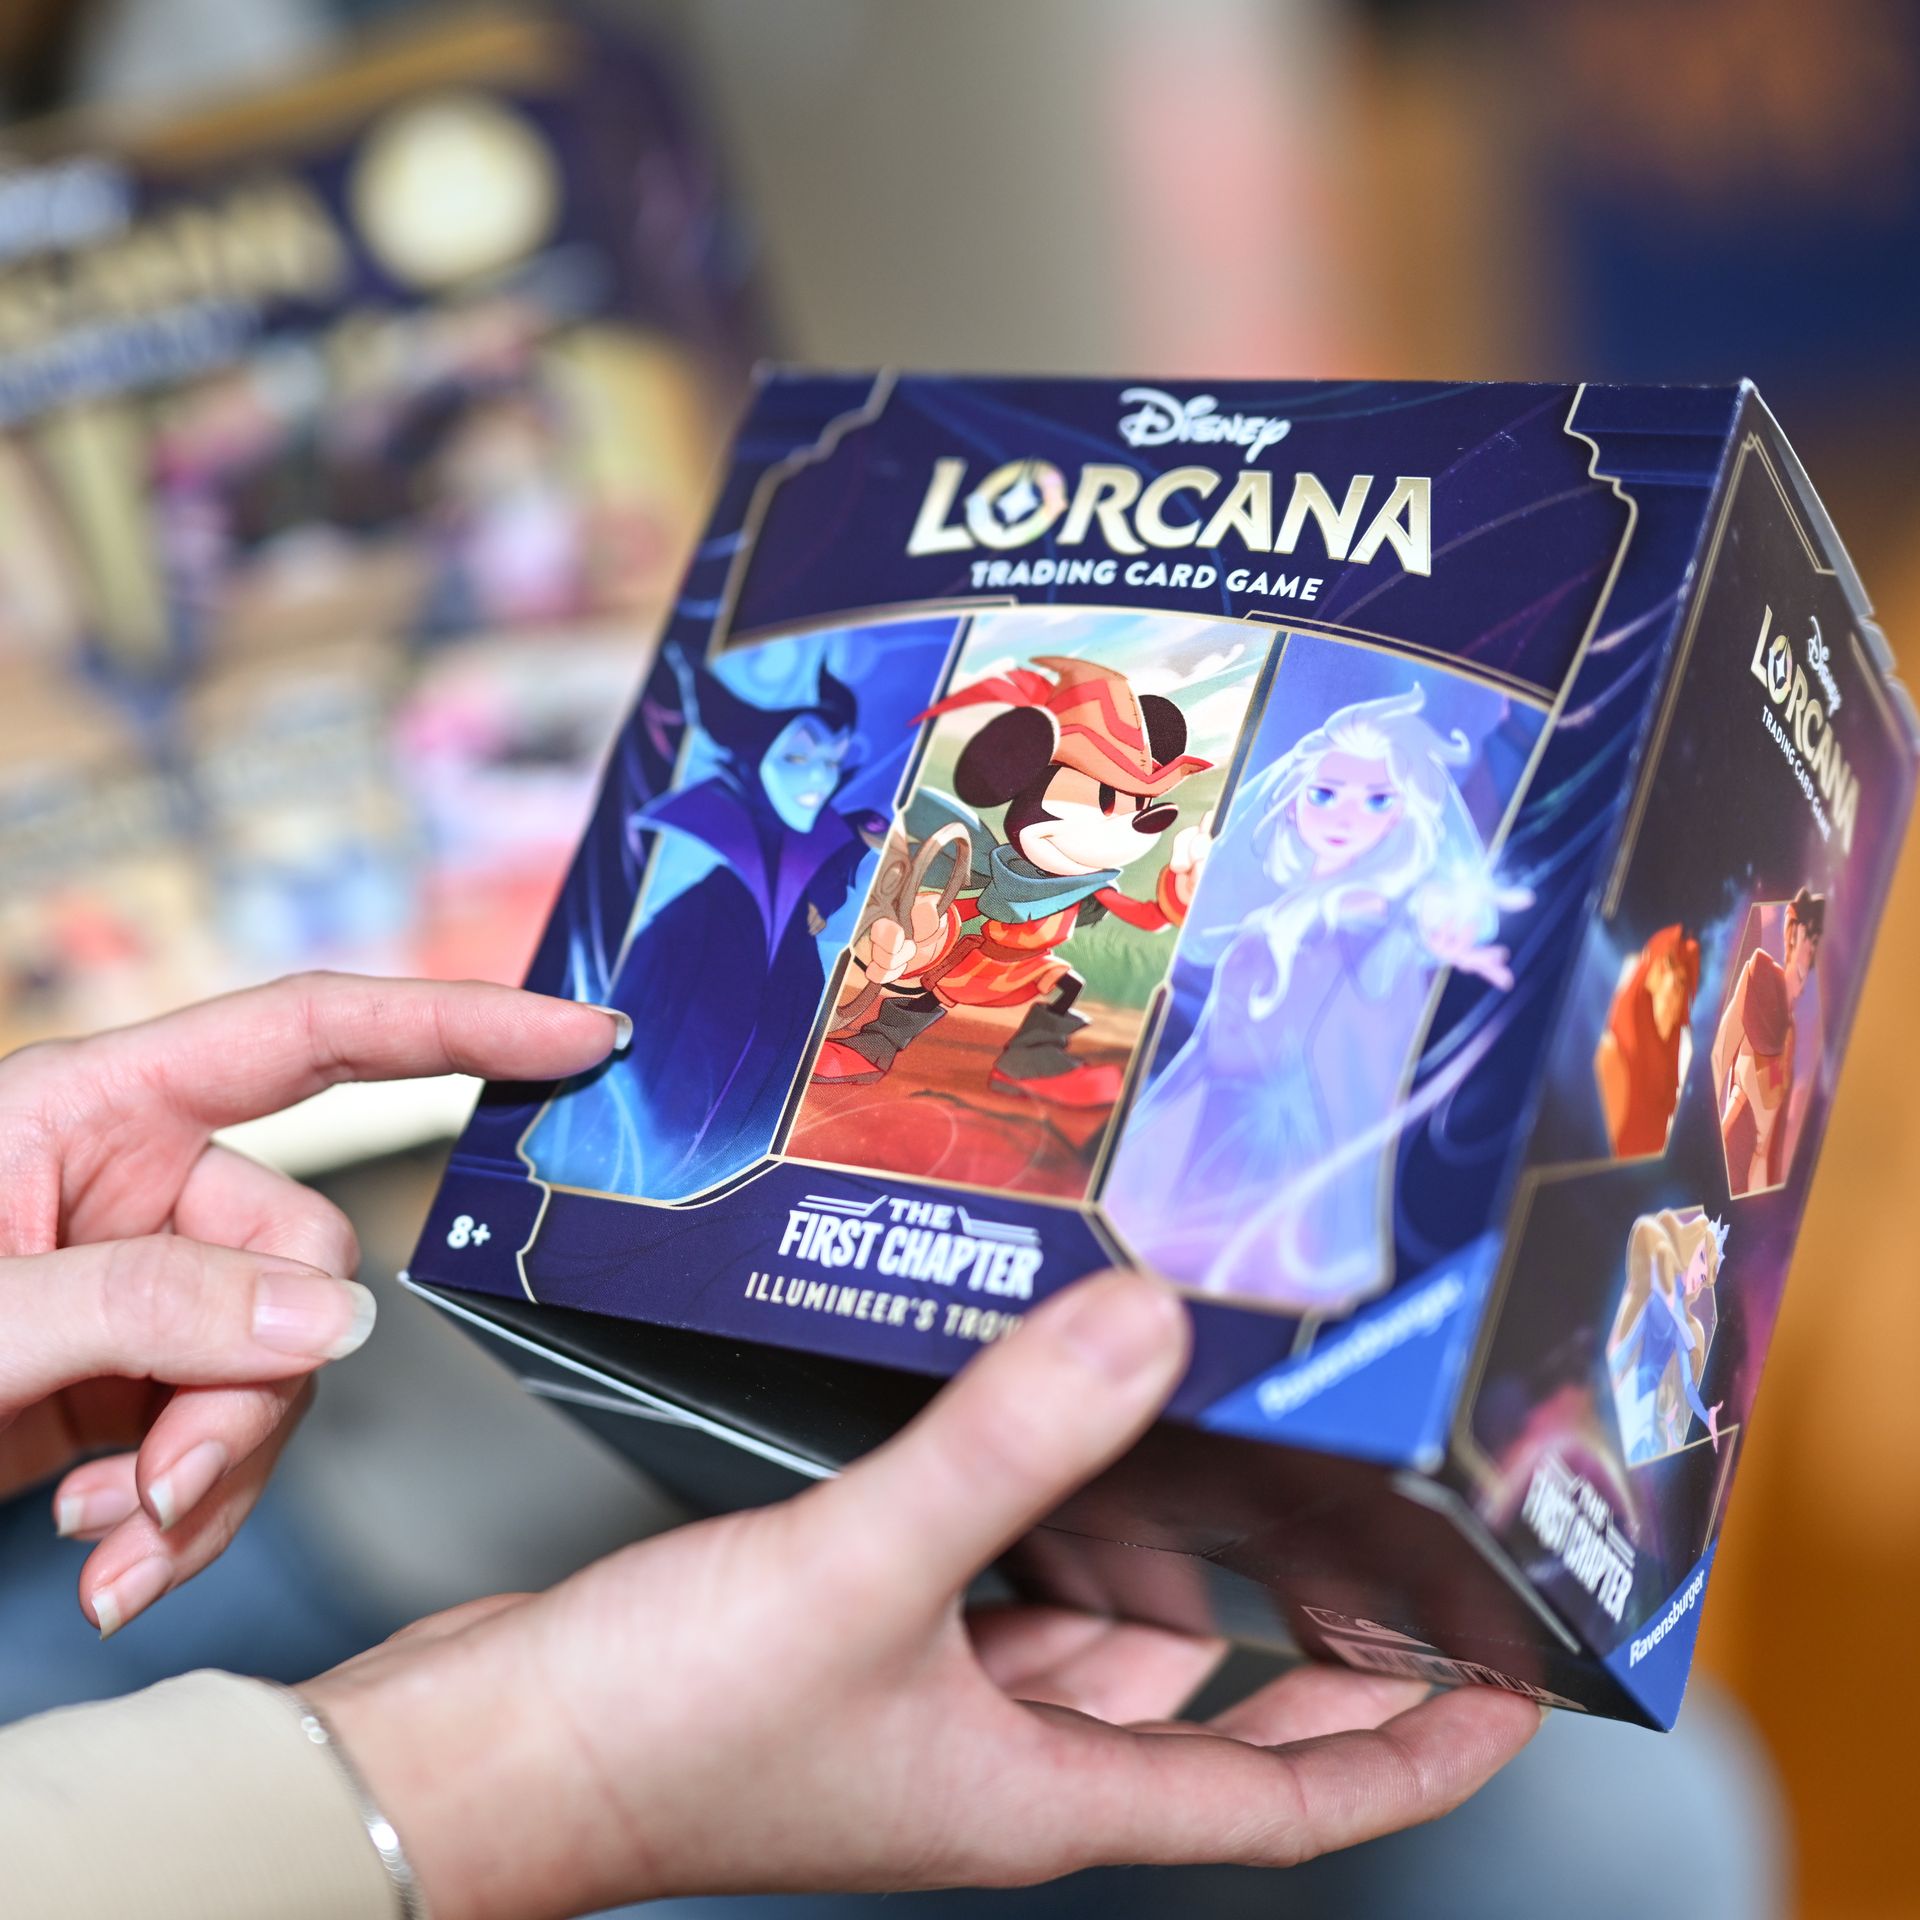 Disney Lorcana Launches Official App Ahead of Launch